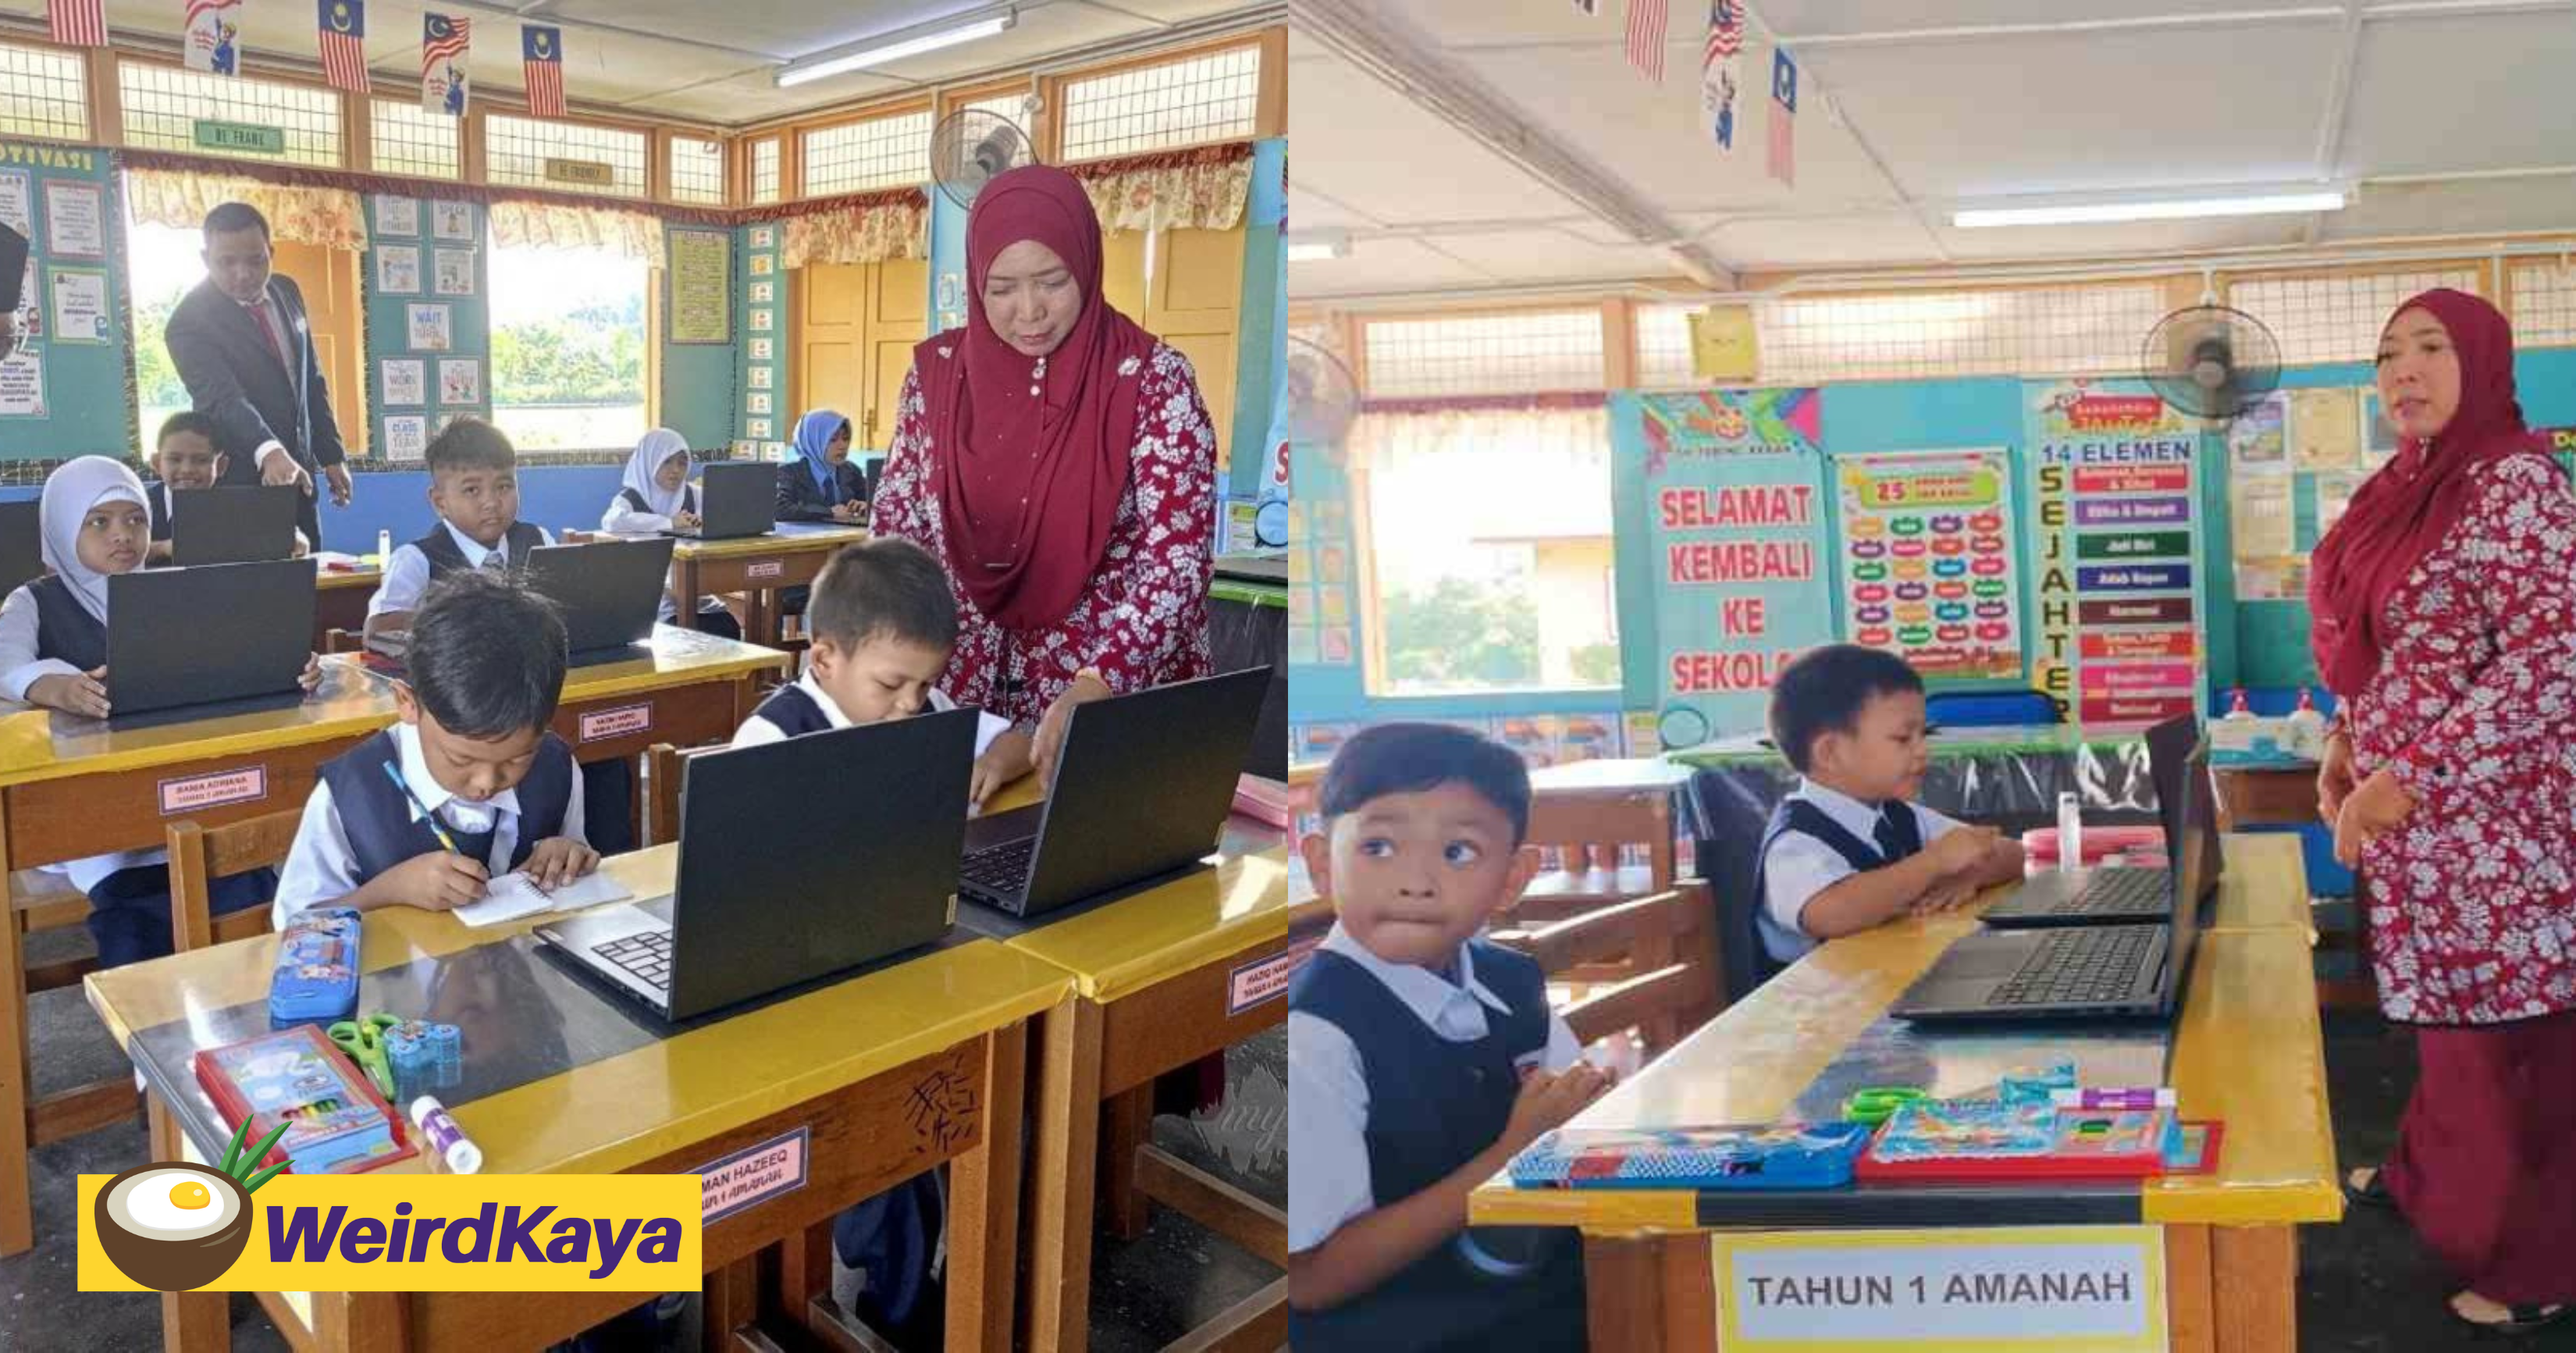 This primary school in perak only has two standard 1 students for the new school year | weirdkaya